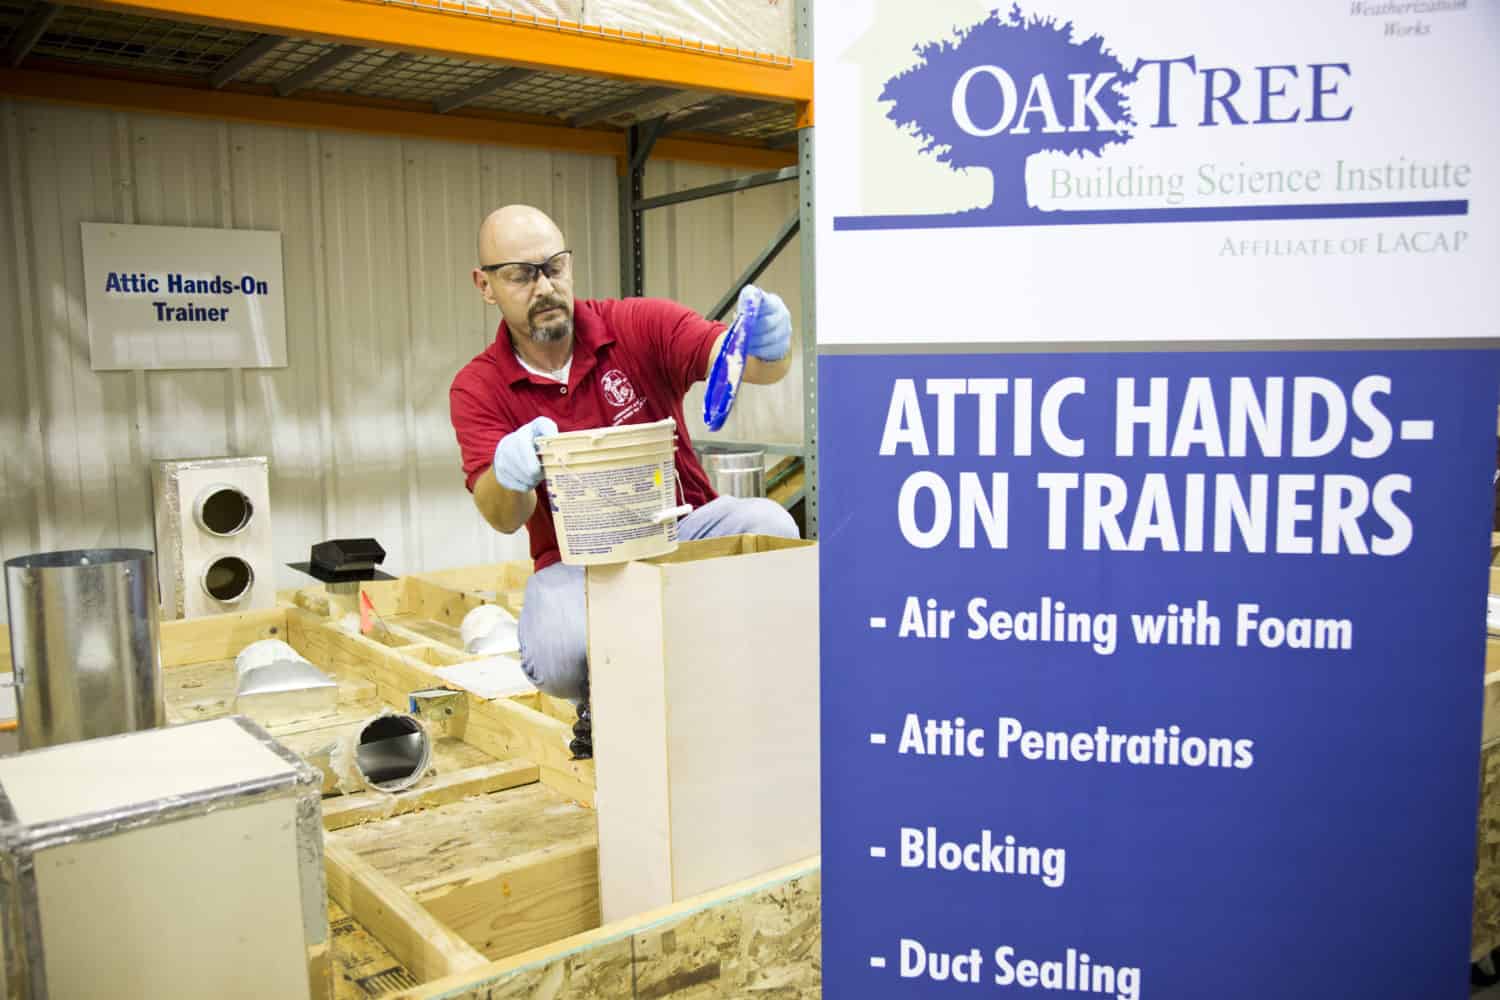 An attic hand-on trainer performs a demonstration with air sealing foam